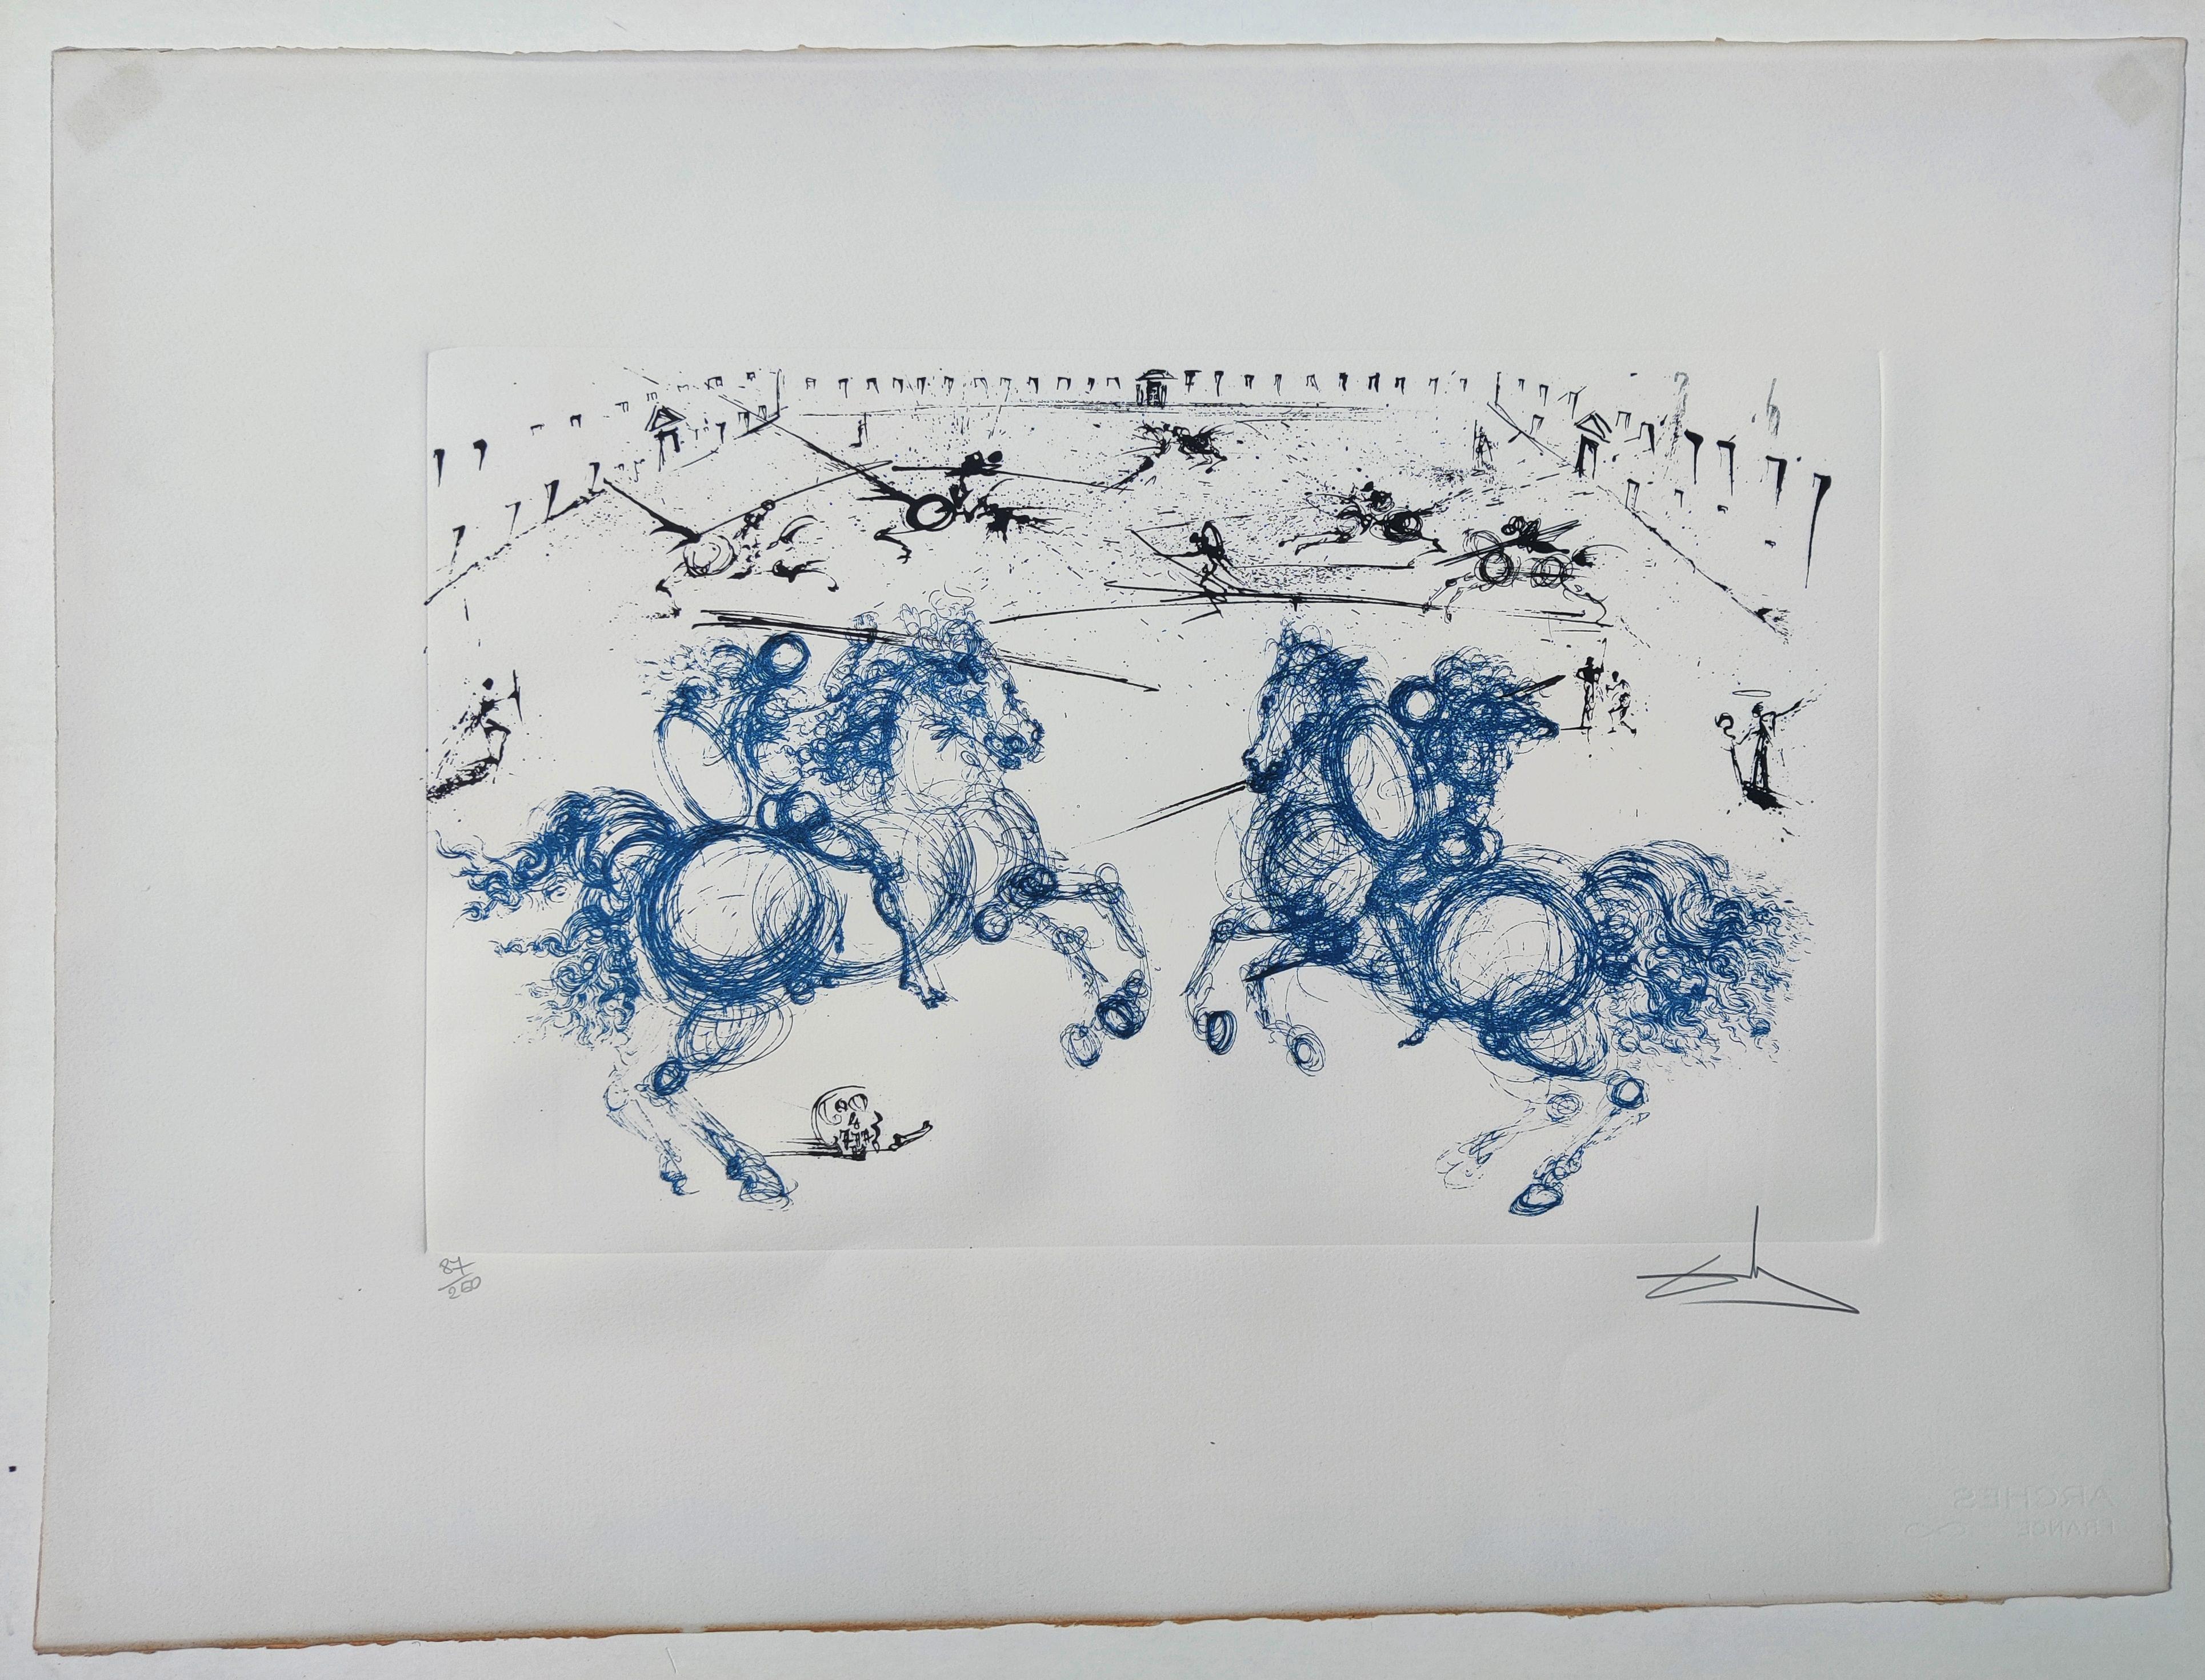 Salvador Dalí­  
Combat de Cavaliers
Color etching and aquatint, 1970-71
Published by Editeuropa, Monaco. From La vida es sueño
Hand signed lower right and numbered 87/250 lower left
Image:  32 x 52 cm
Sheet:  56 x 76 cm
Unframed
